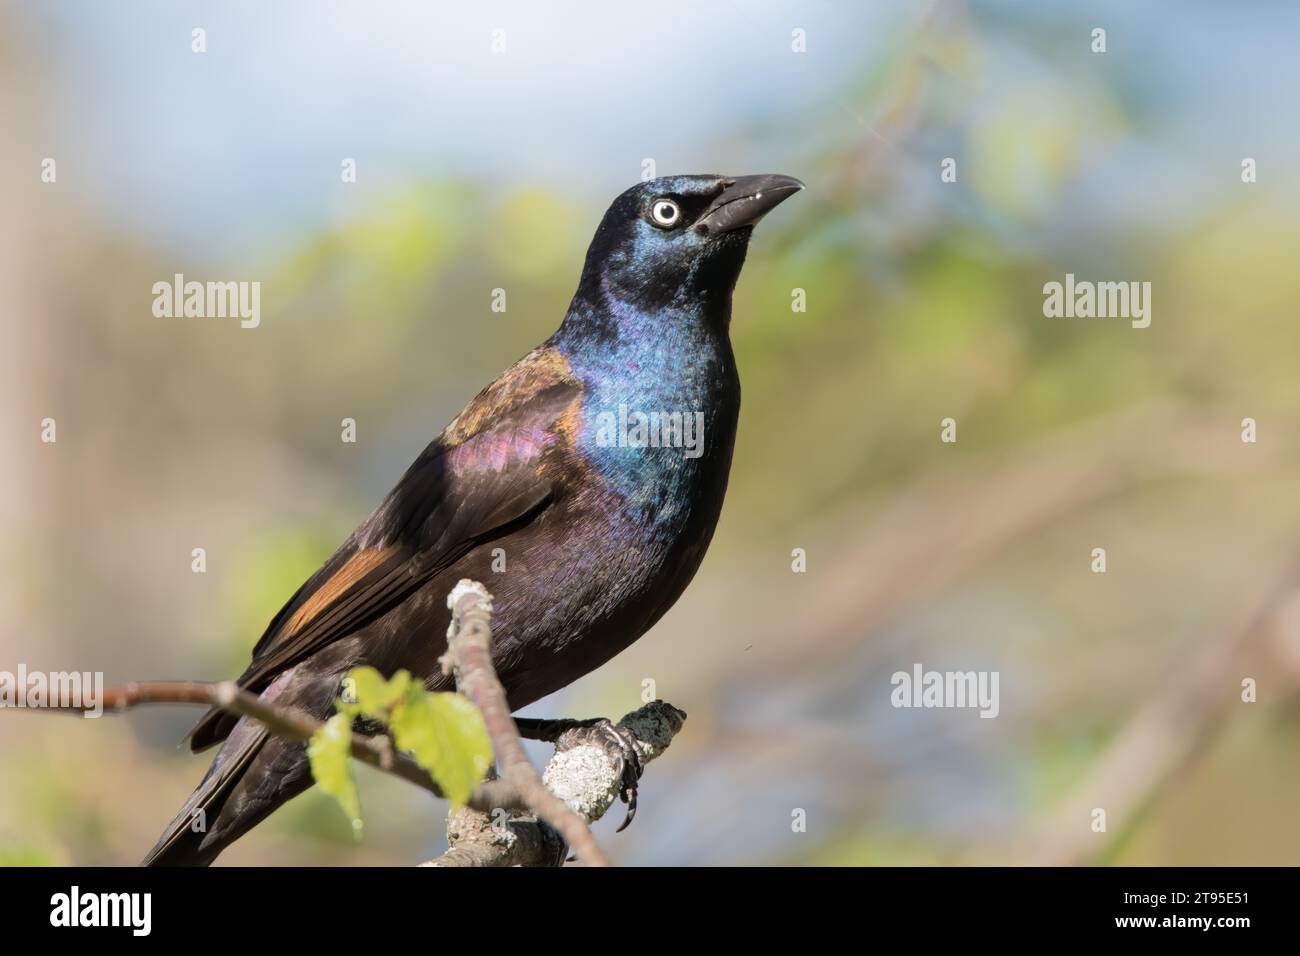 Male Common Grackle (Quiscalus quiscula) perched on small Birch Tree branch, with blurry background in northern Minnesota USA Stock Photo